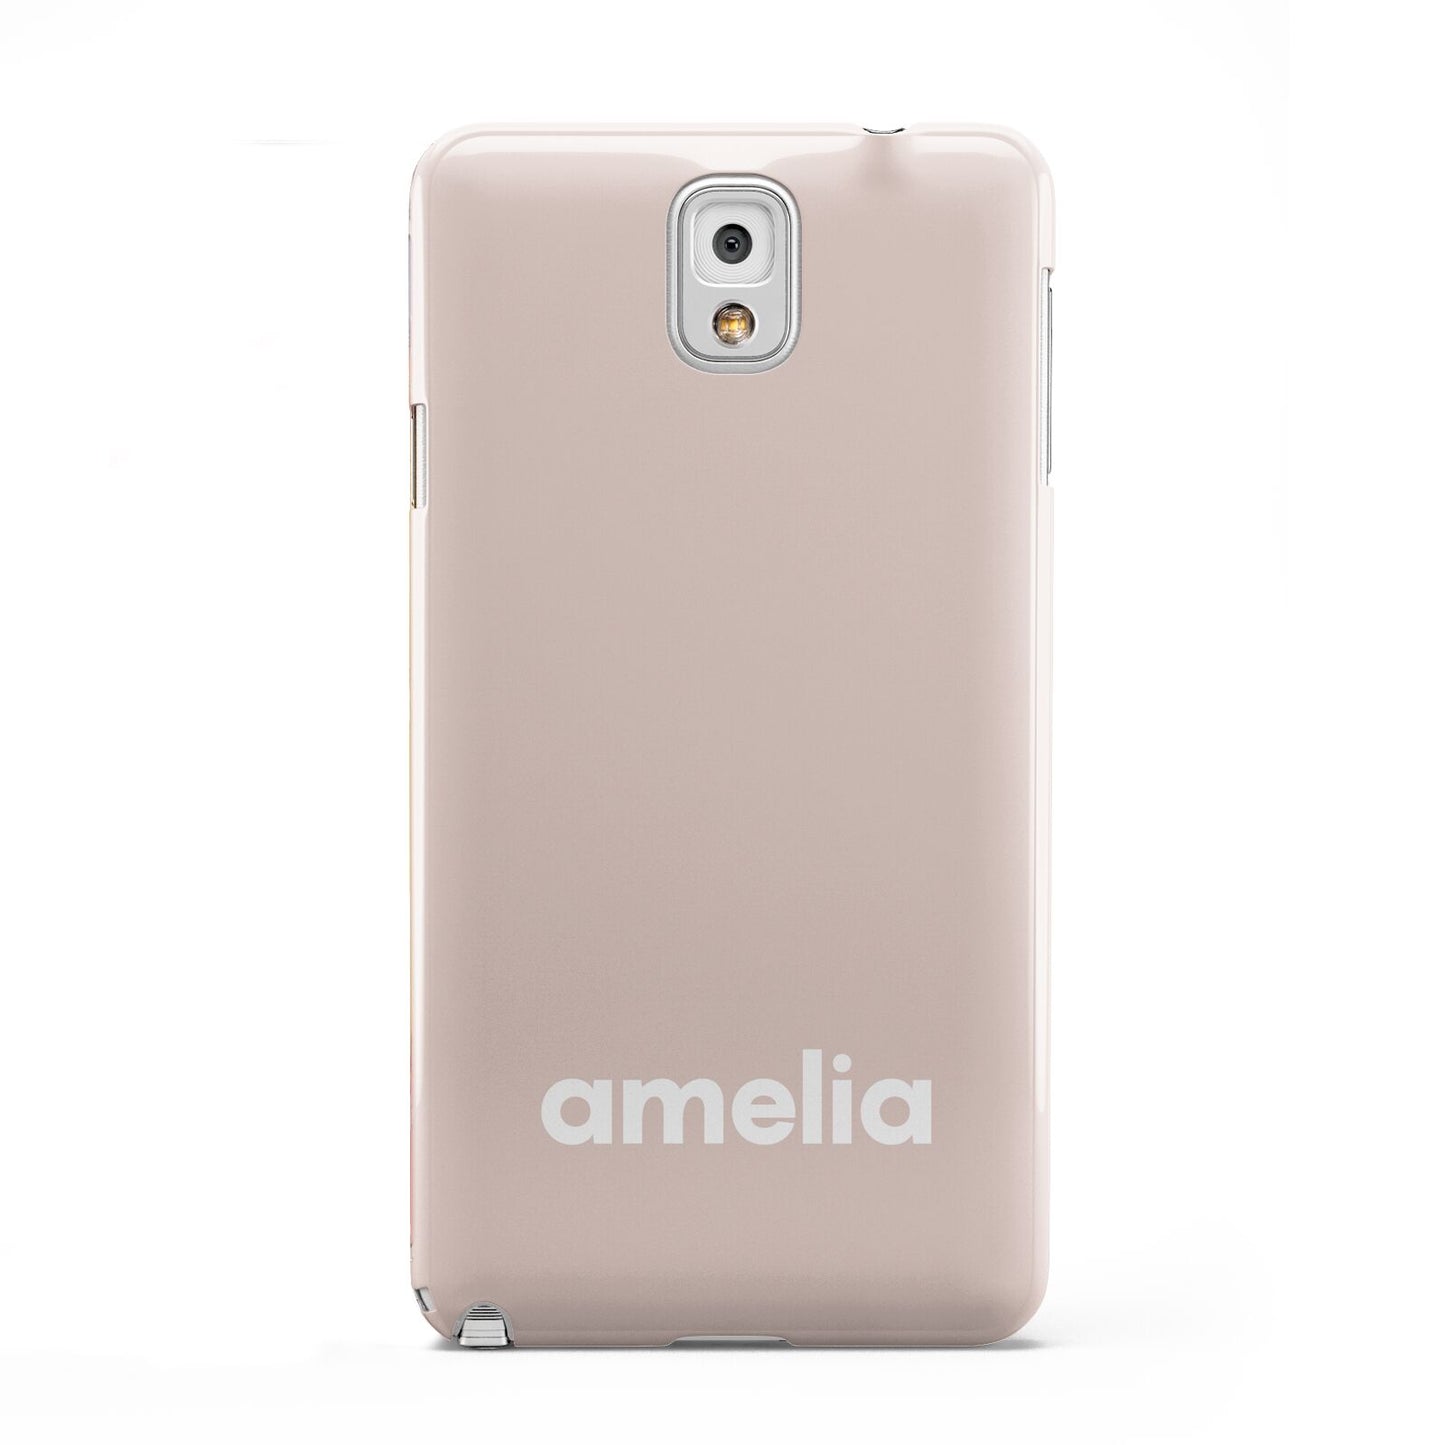 Simple Blush Pink with Name Samsung Galaxy Note 3 Case